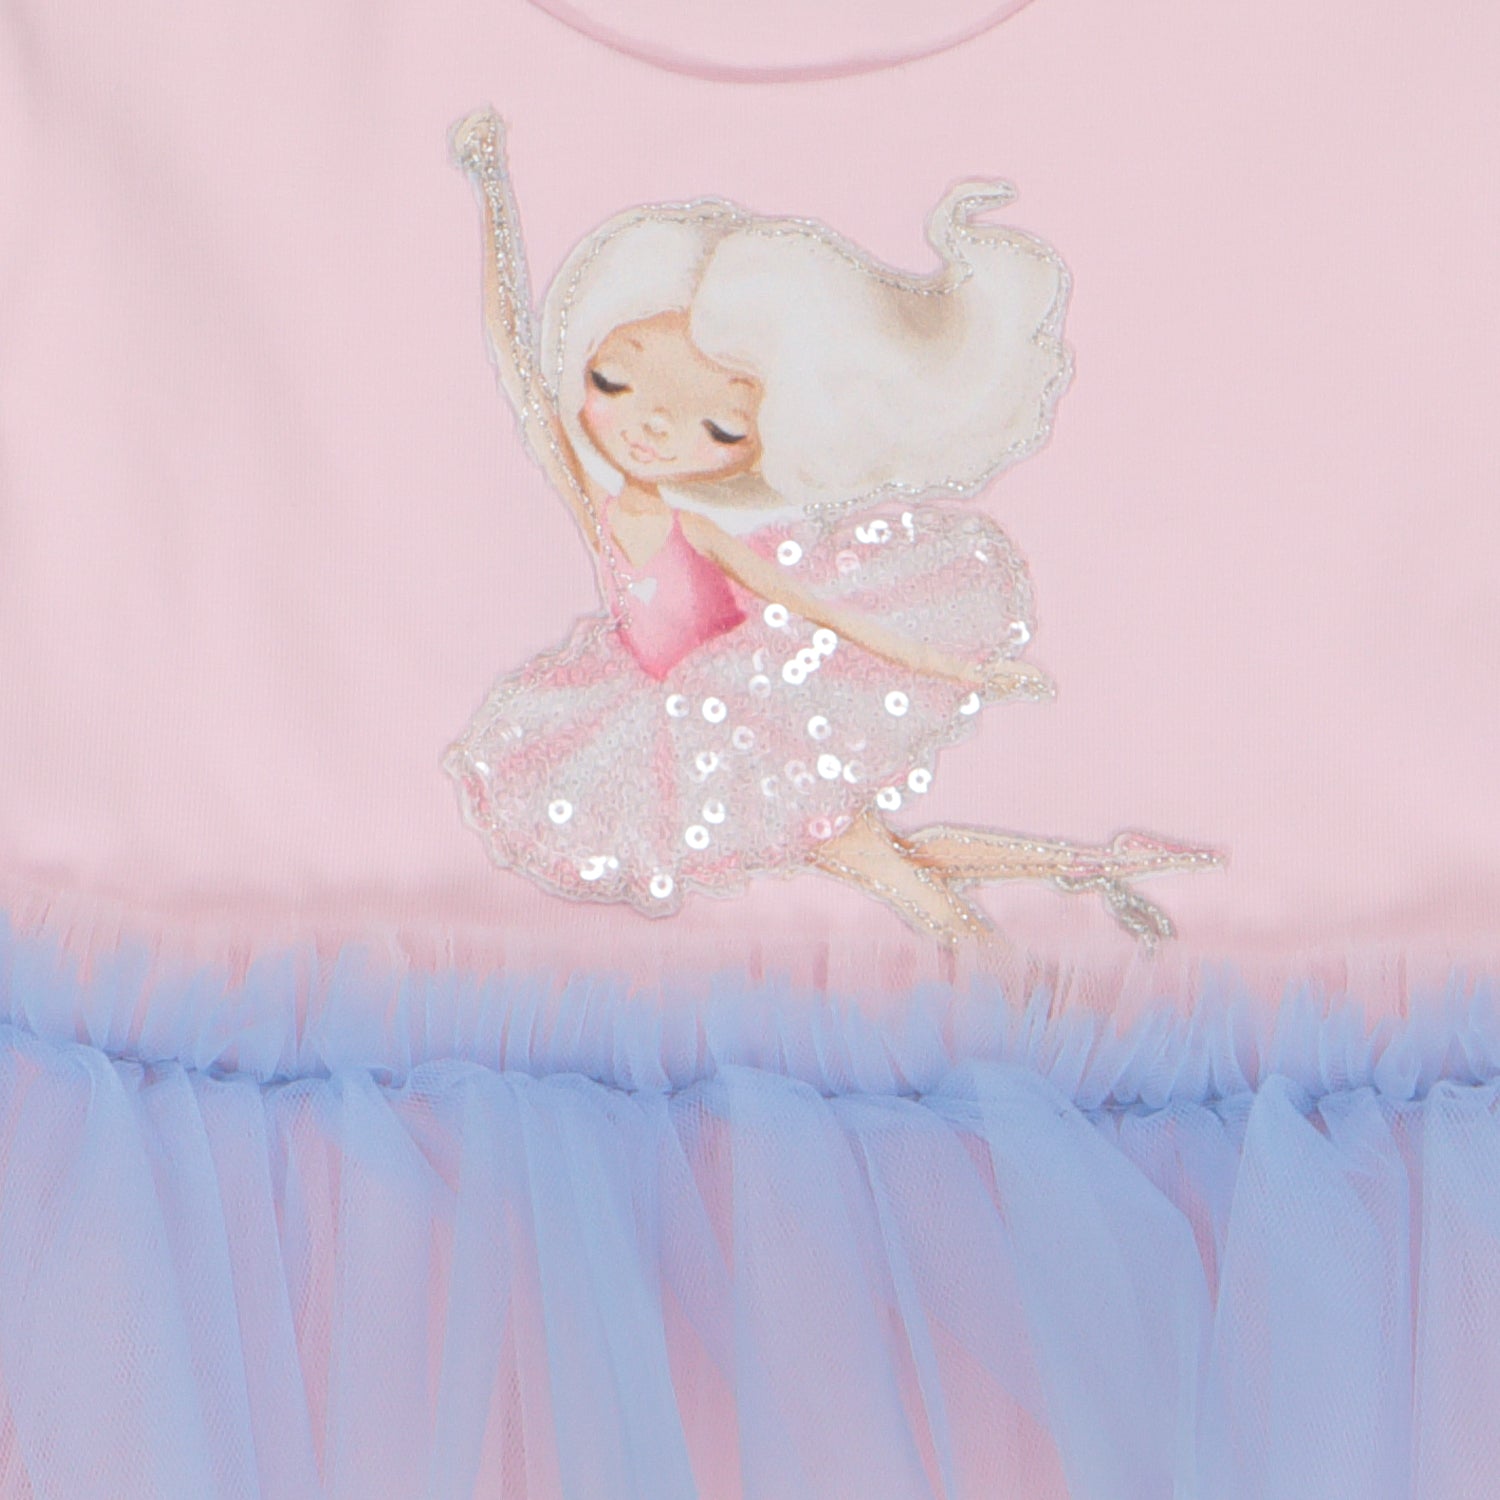 Pink & Blue Fairy Tulle Romper